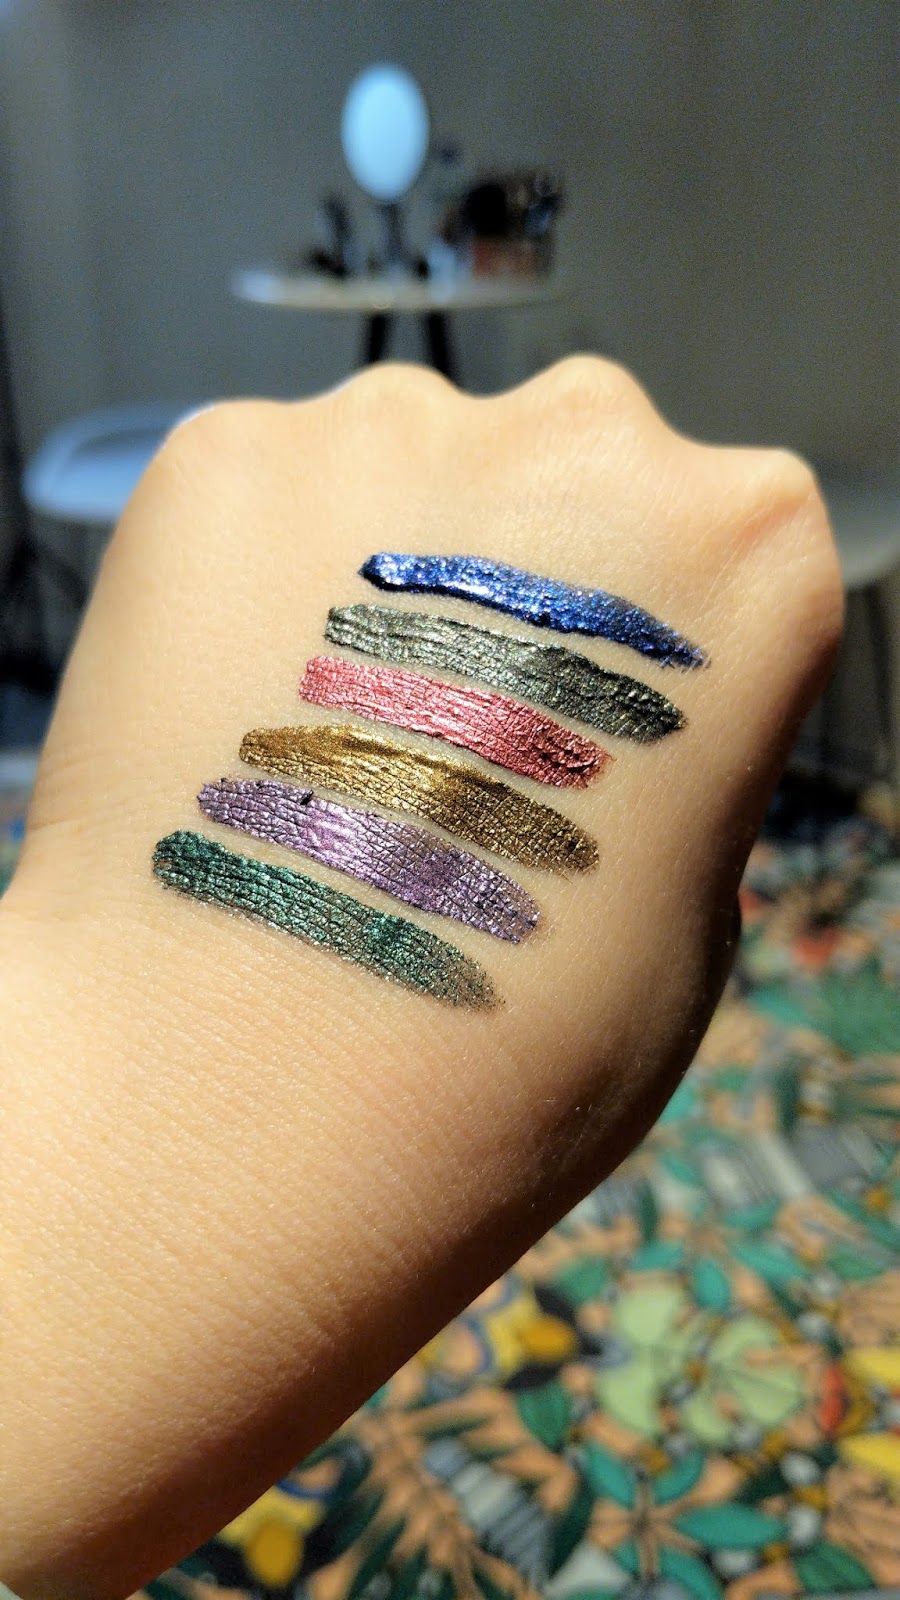 Stila_AW18_Vivid_and_Vibrant_Shimmer_and_Glow_Swatches